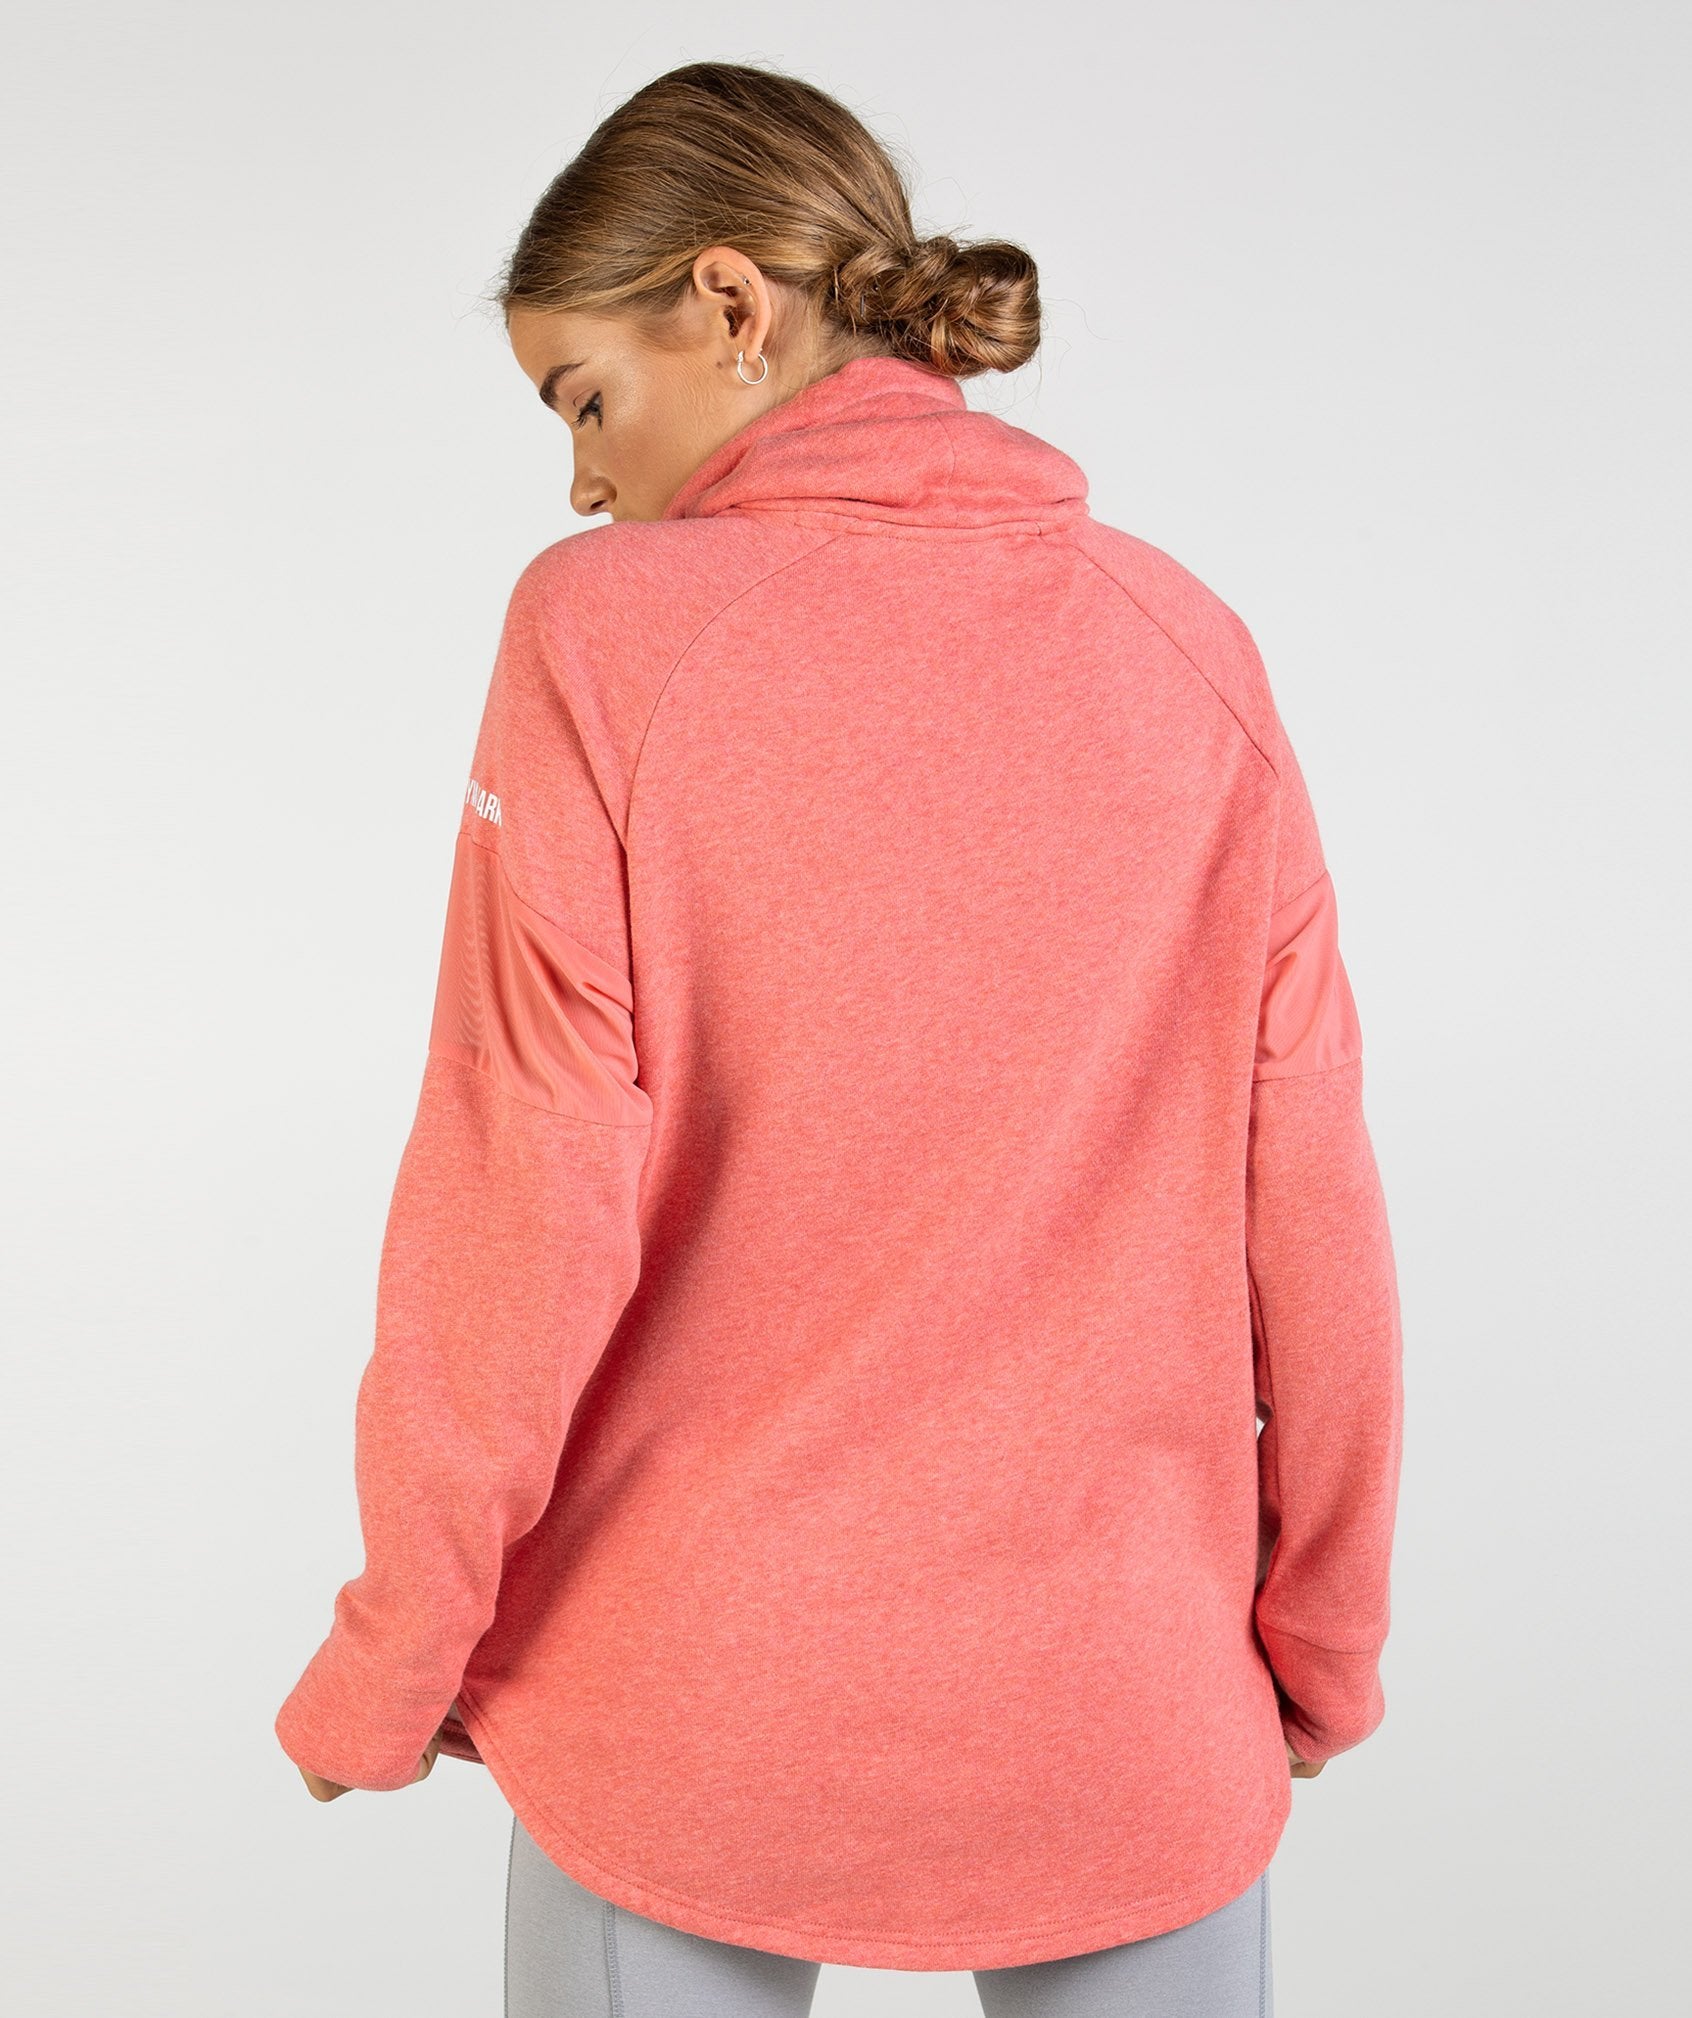 Slouch Hoodie in Peach Coral Marl - view 2